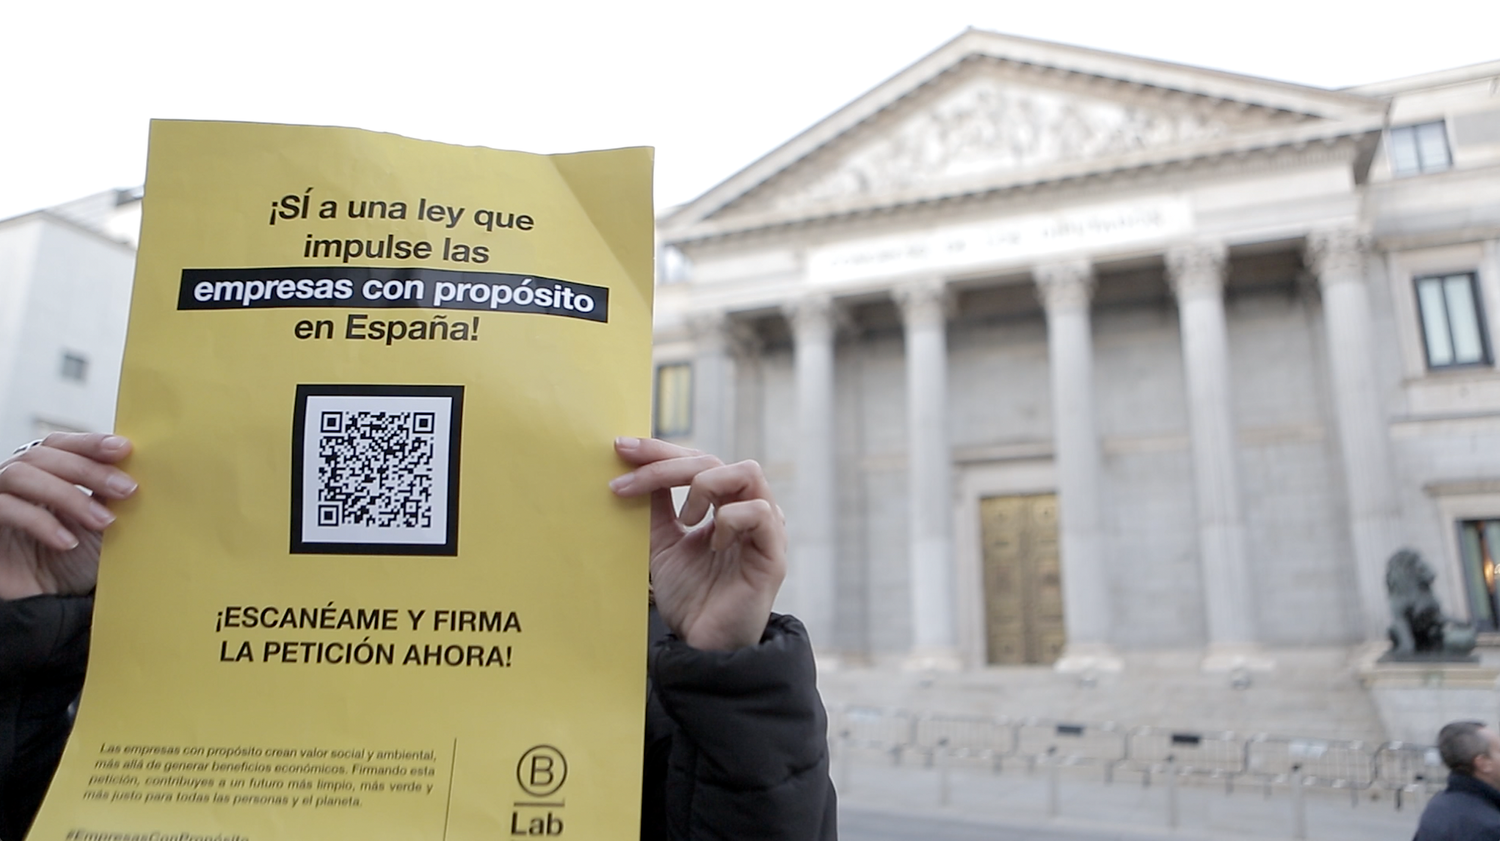 Congress of Deputies approves the legal concept of Empresas Con Propósito in Spain